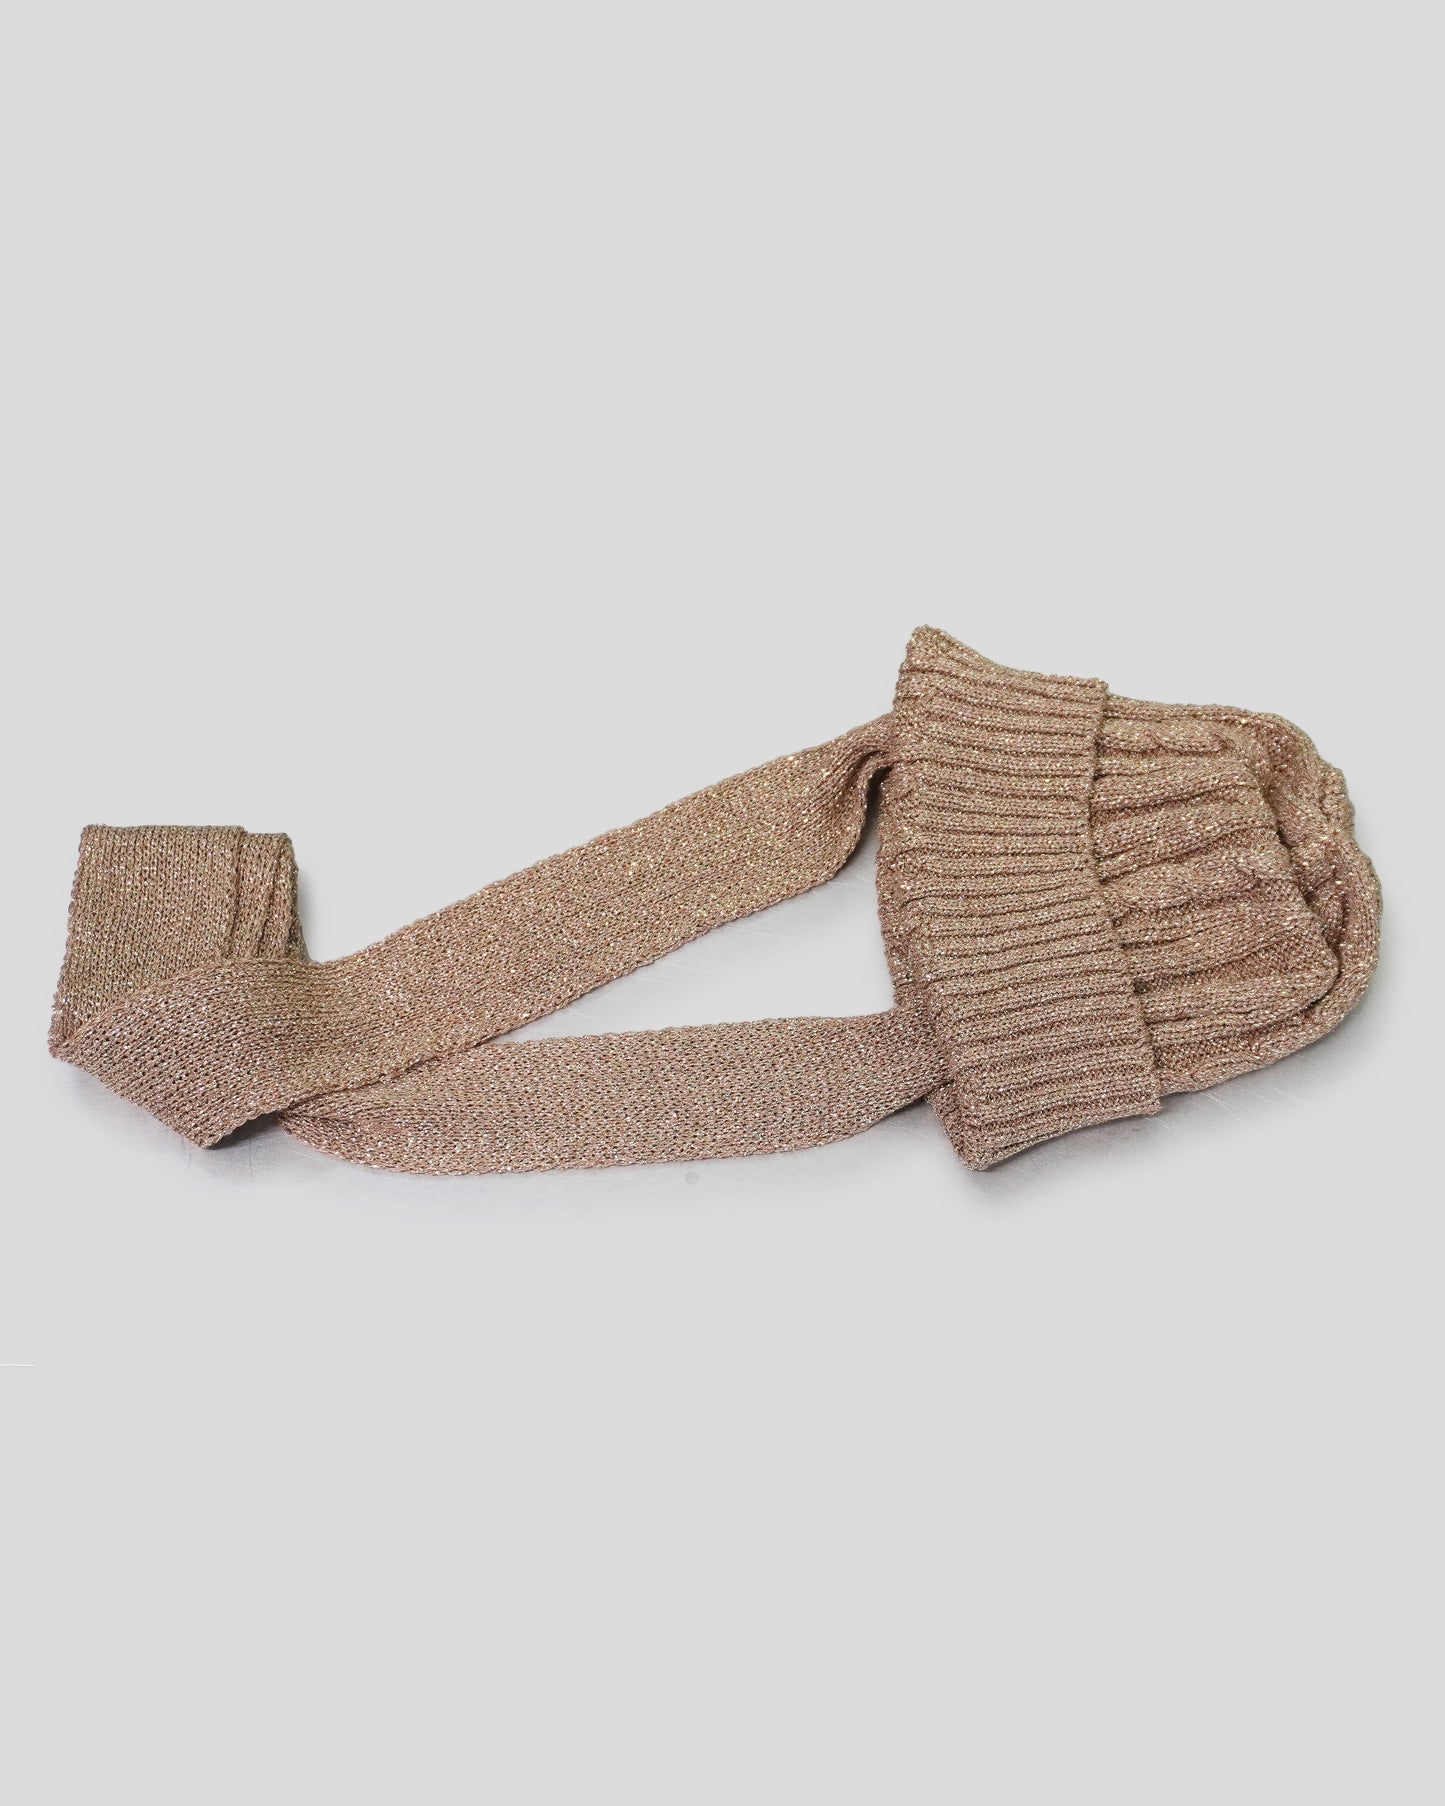 MERRMA - Gold Knit Beanie and Scarf